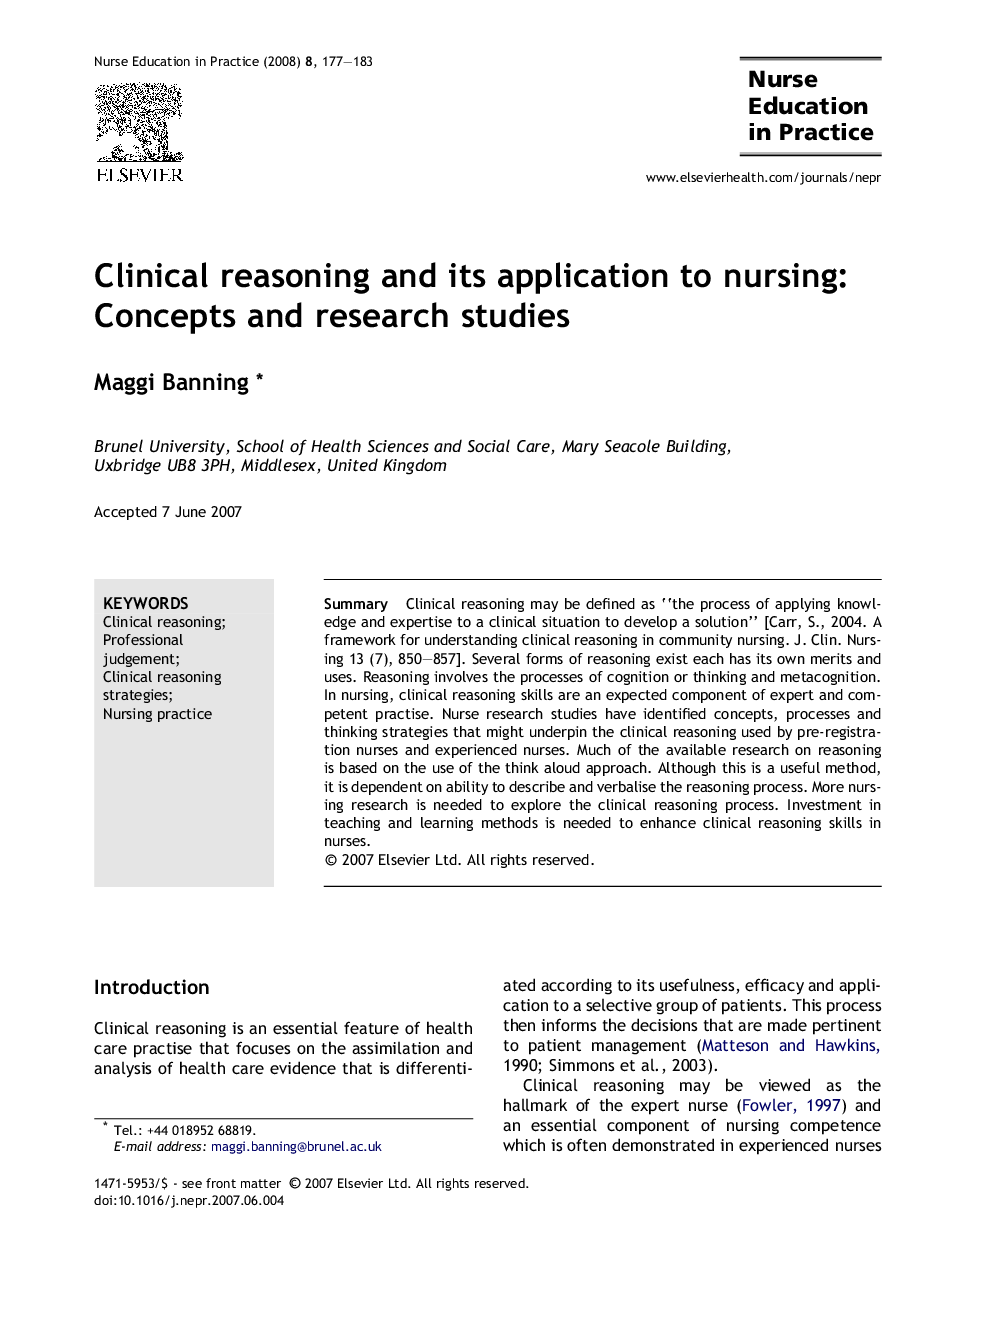 Clinical reasoning and its application to nursing: Concepts and research studies